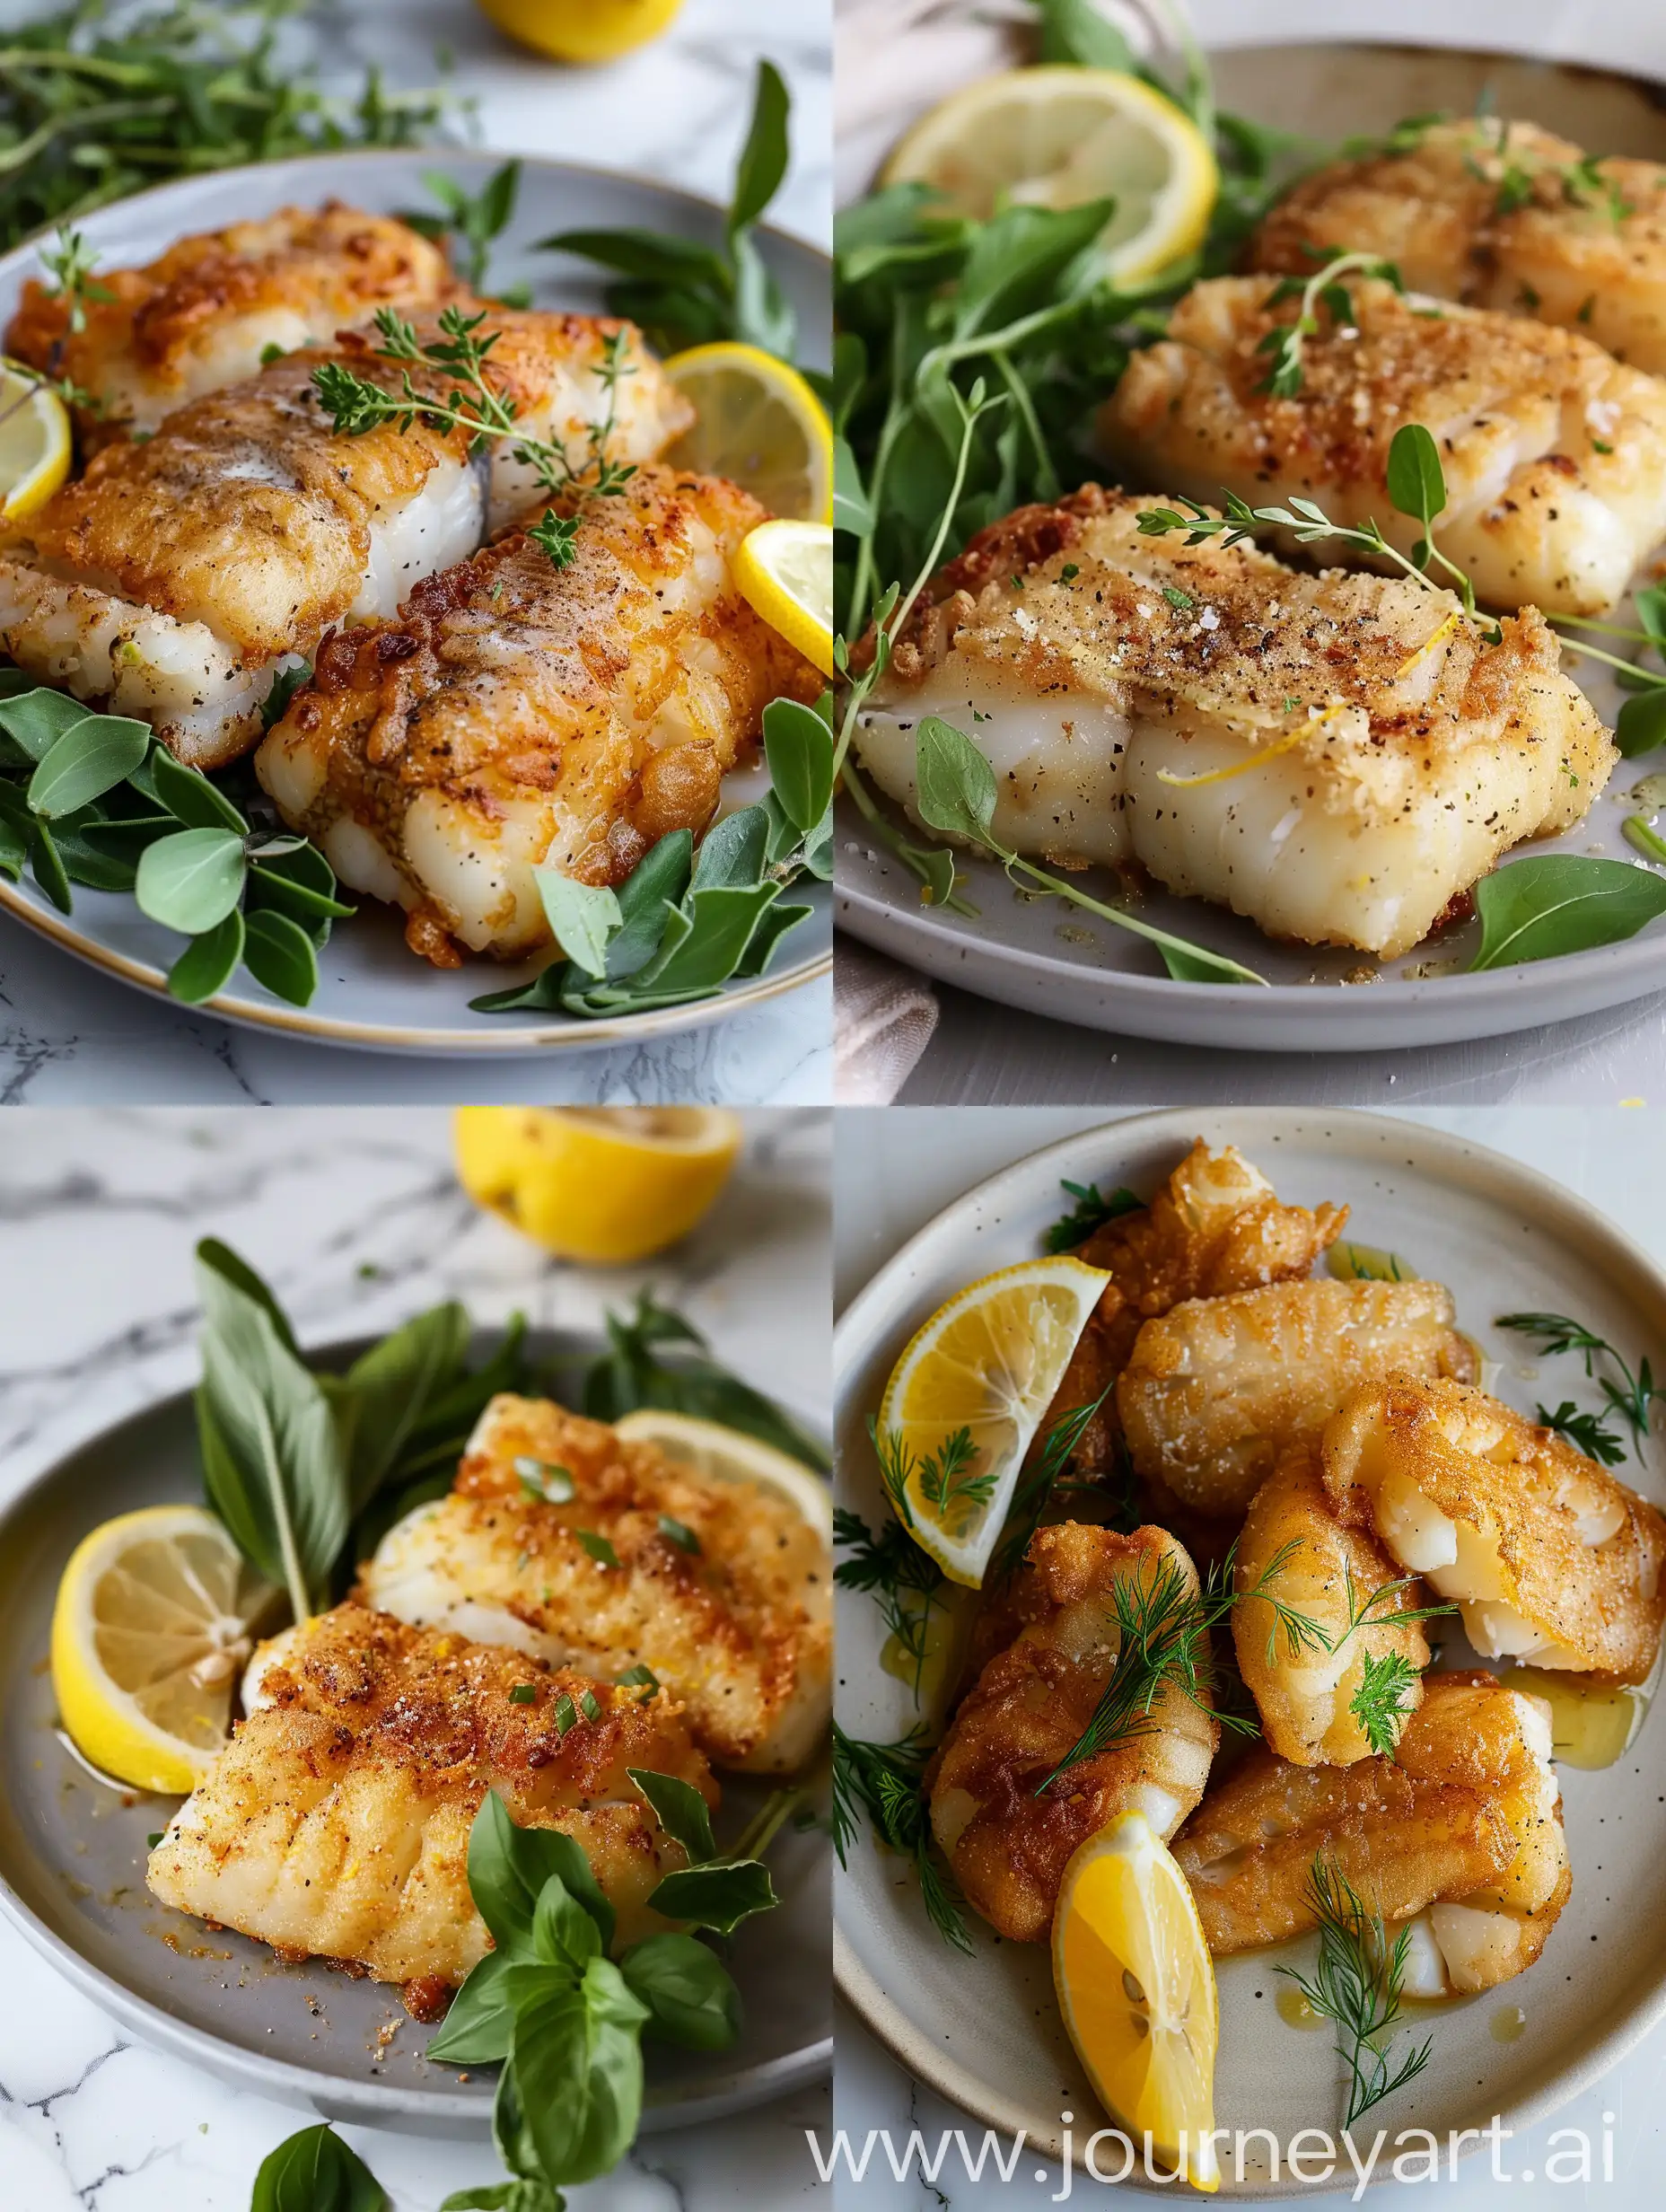 Delicious-Fried-Cod-with-Lemon-and-Fresh-Greens-on-Plate